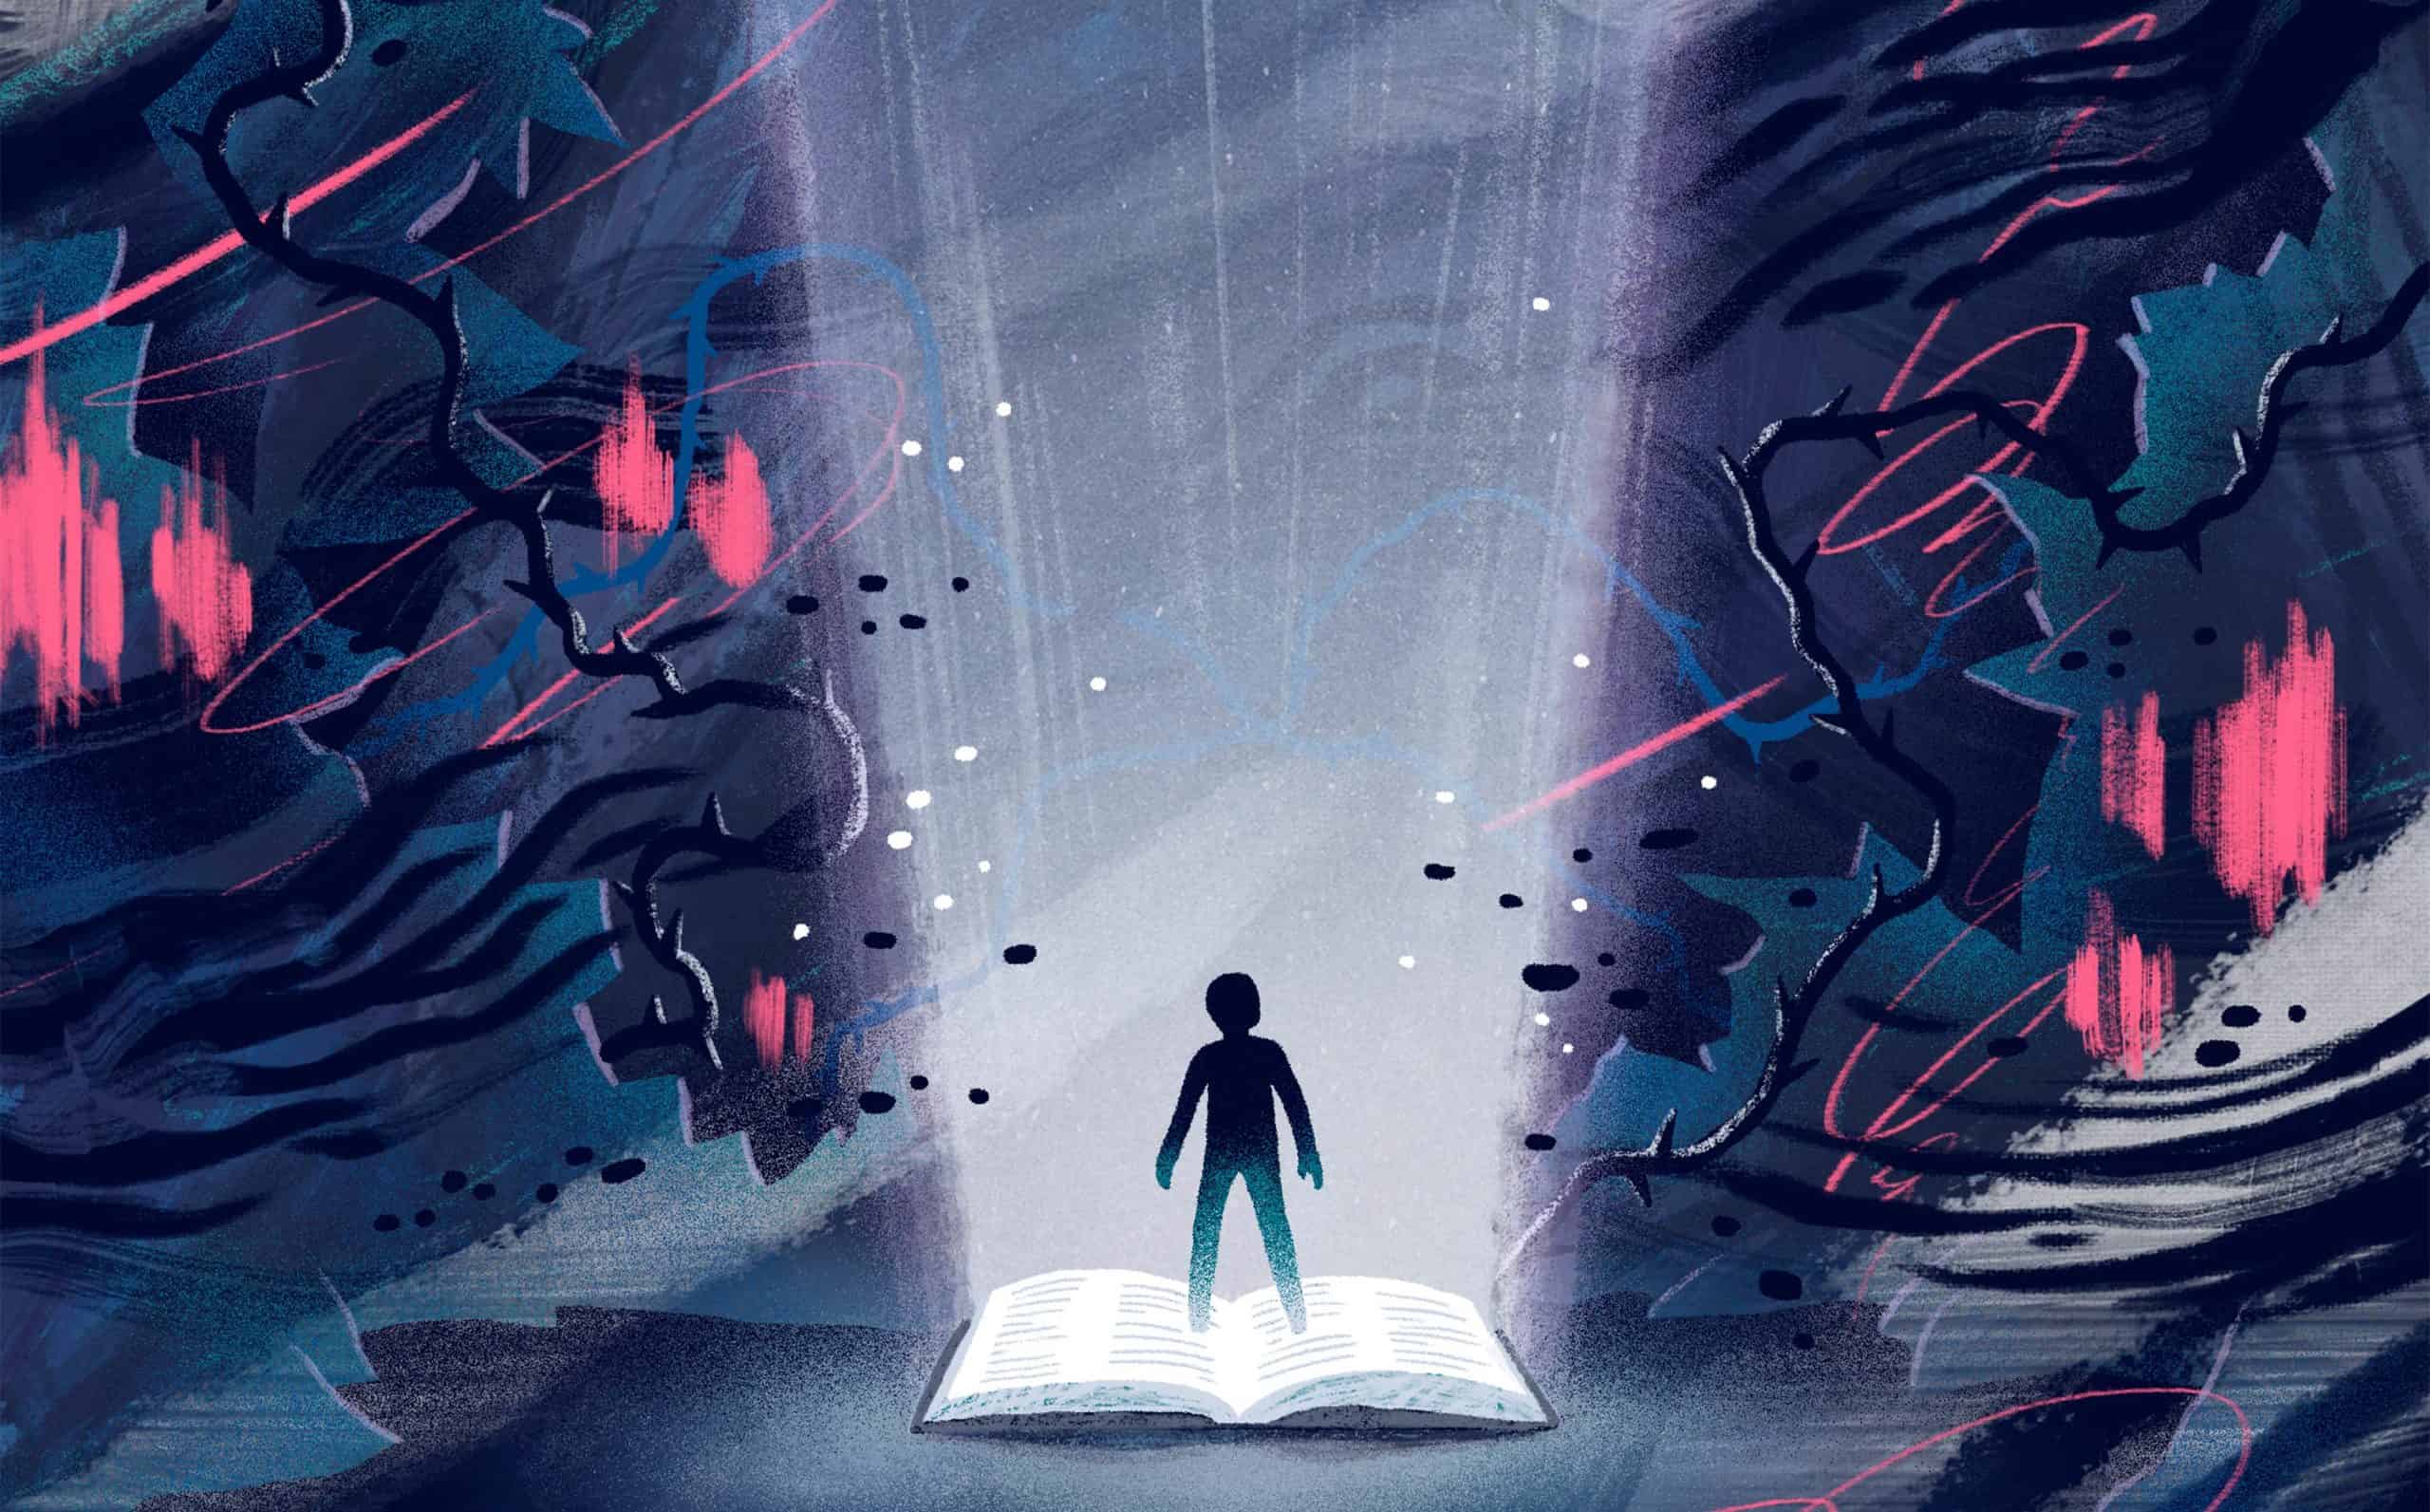 An illustration of a child’s silhouette standing on a shining bible, surrounded by a dark landscape